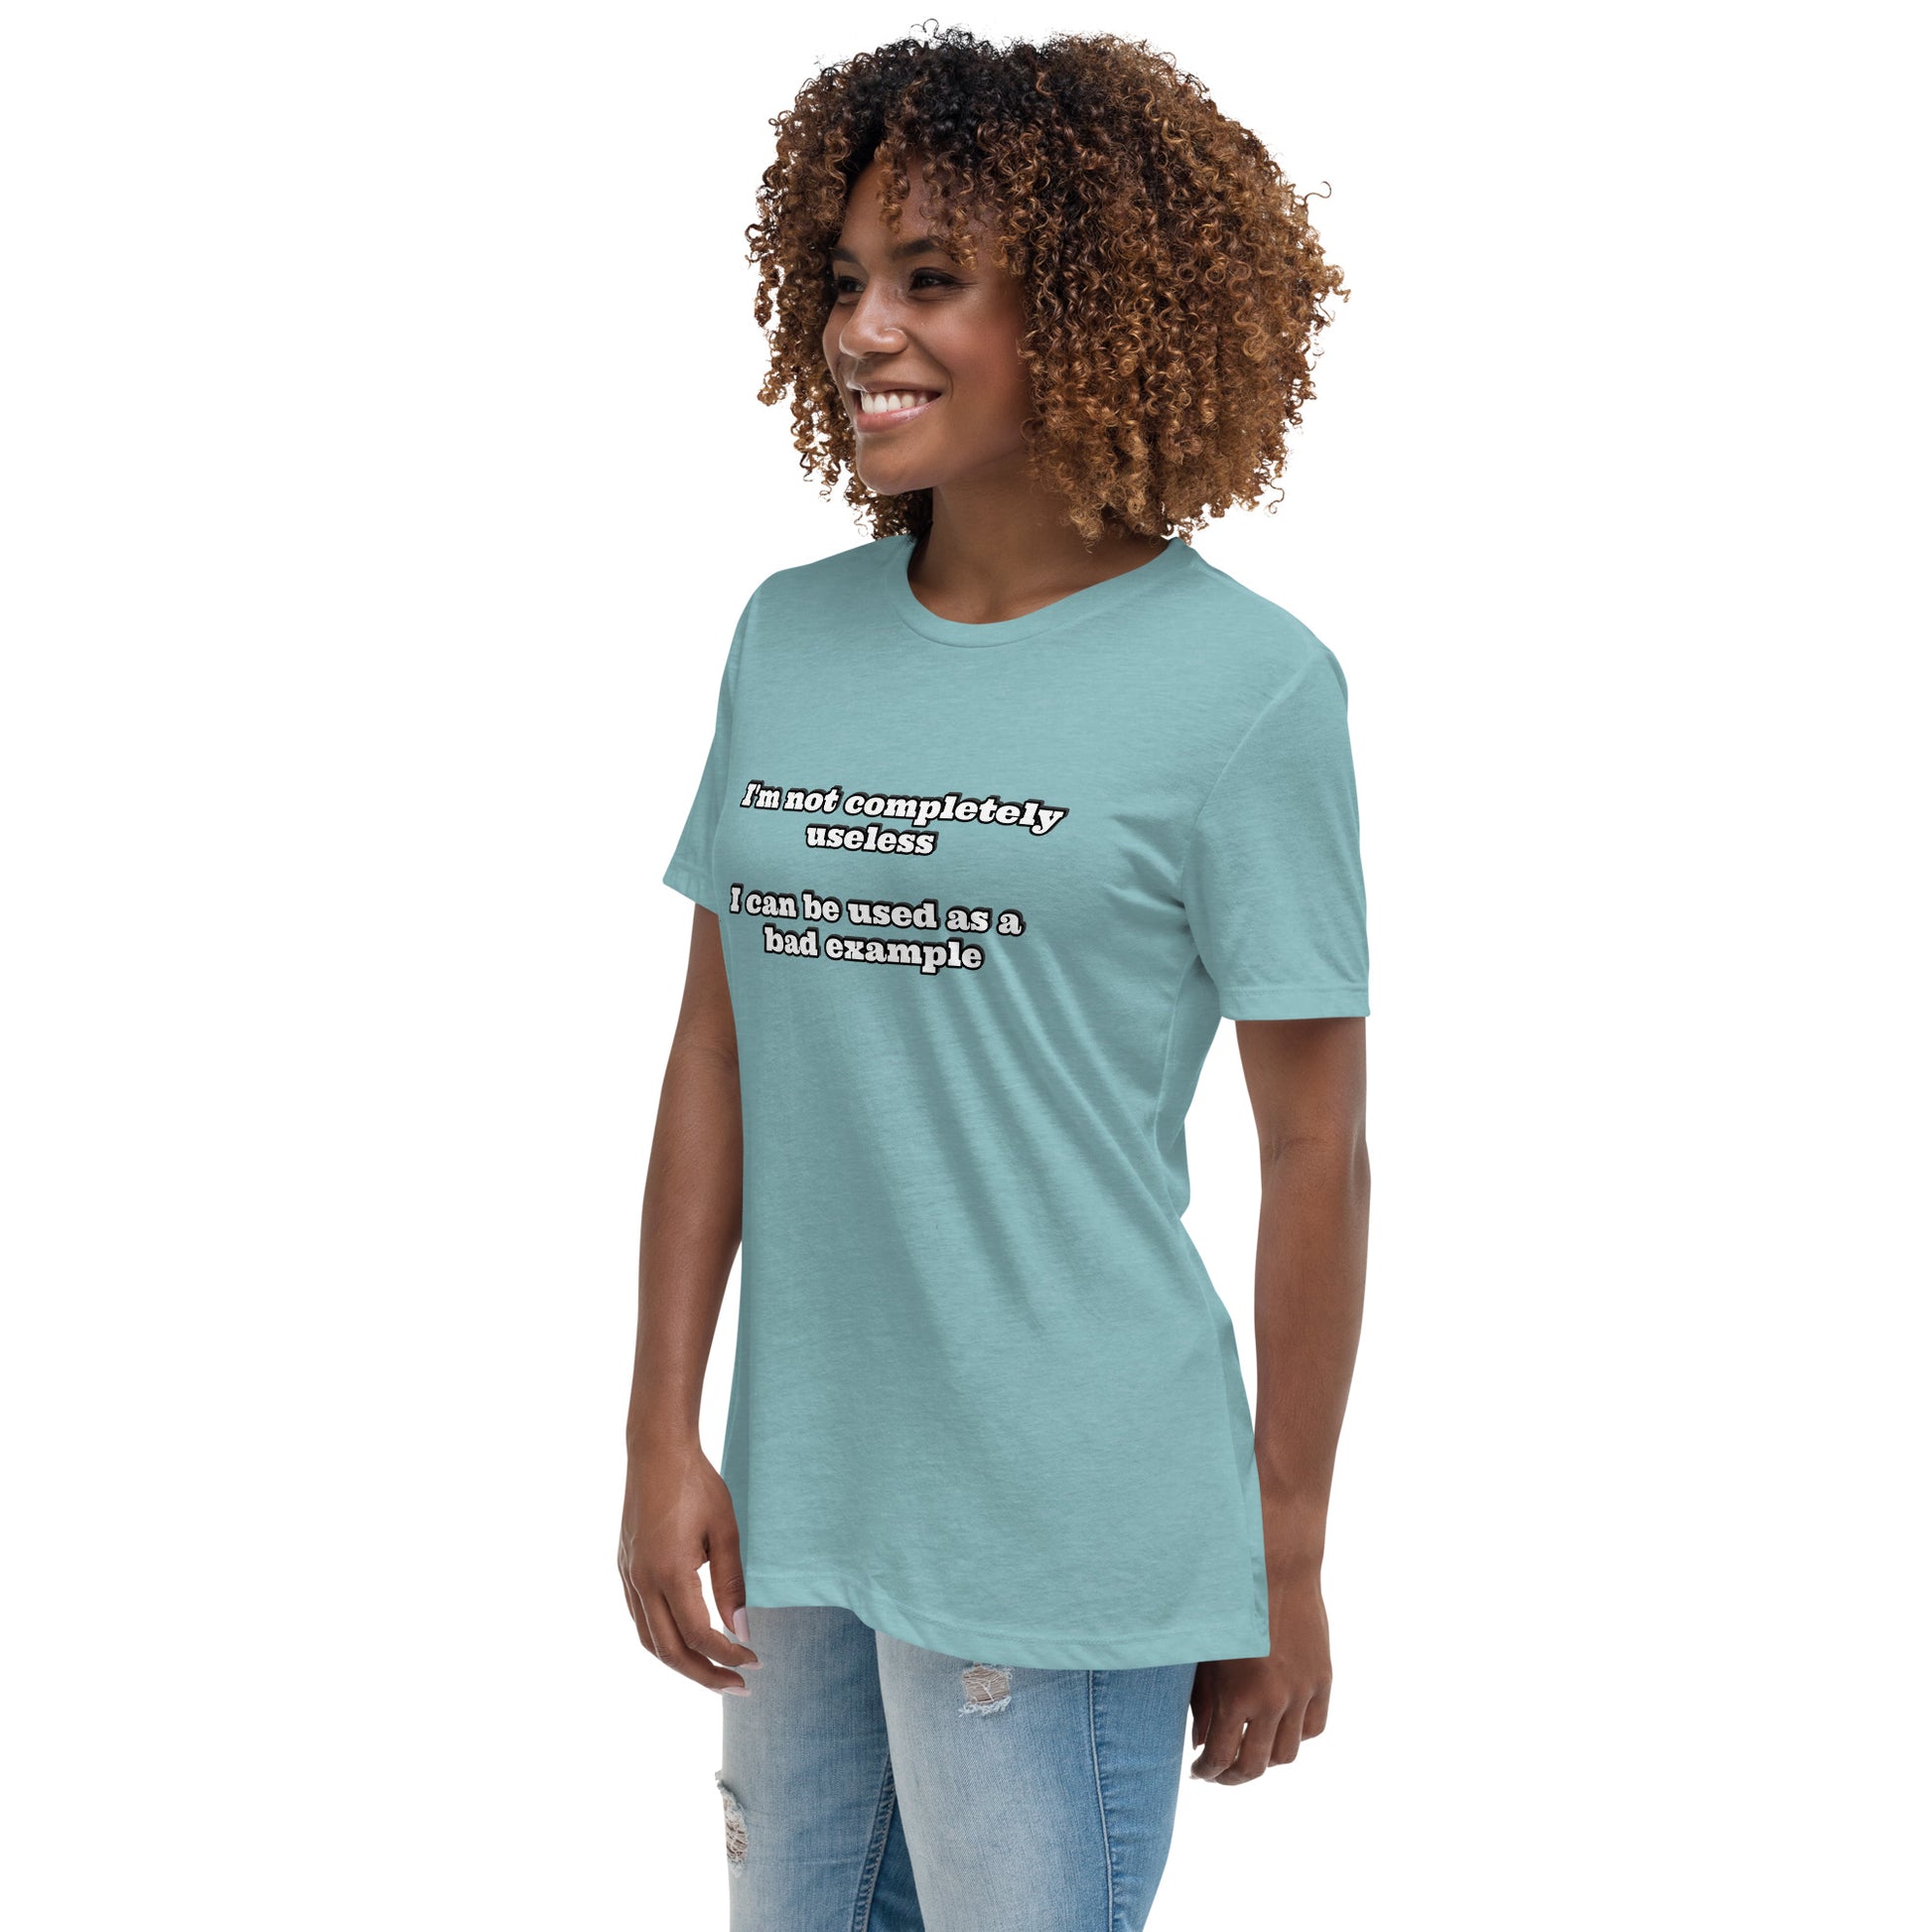 Women with blue lagoon t-shirt with text “I'm not completely useless I can be used as a bad example”